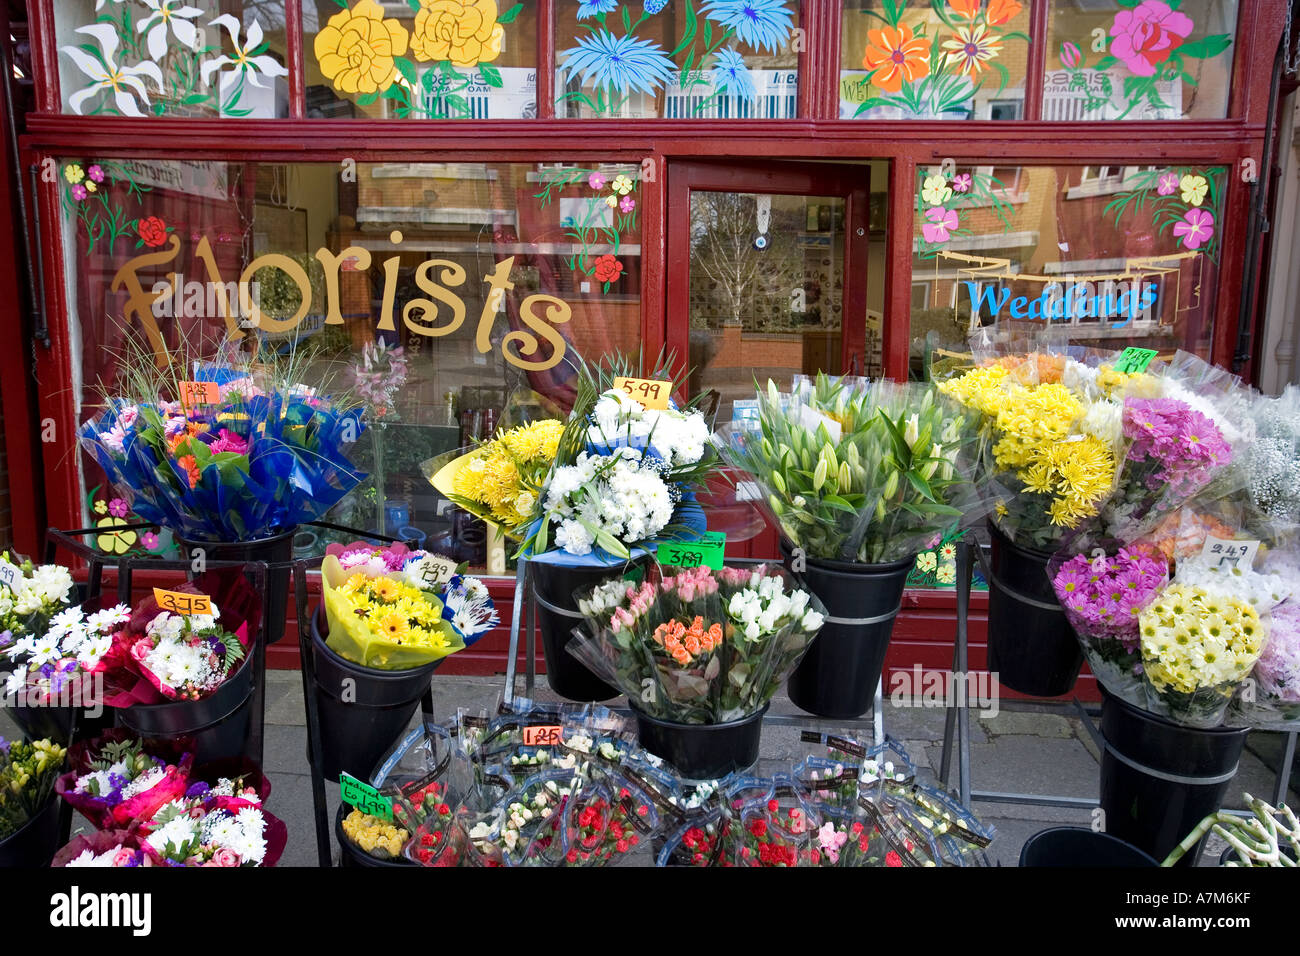 Bouquets of flowers for sale at a florists shop in Birmingham UK Stock Photo